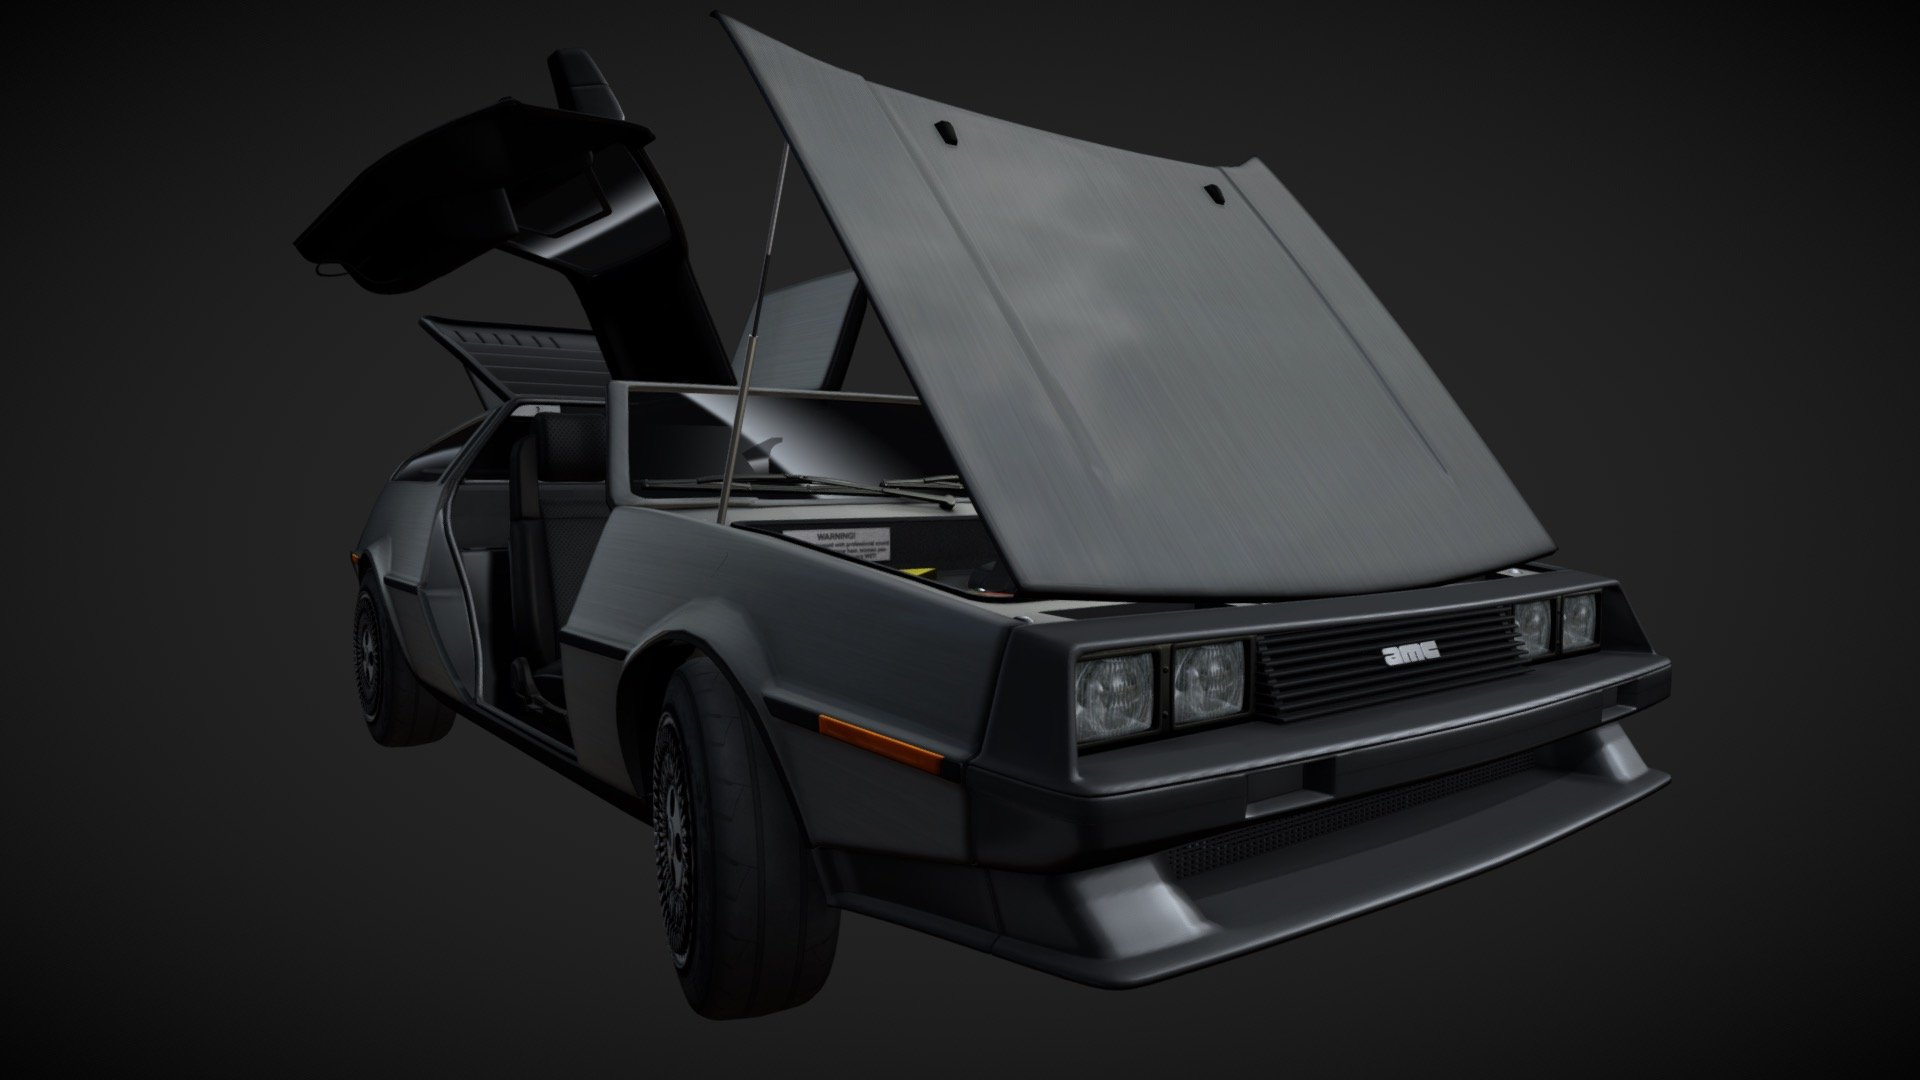 Originally the model was intended for Second Life.
Overall the model is midpoly.
Because of the weird engine of Second Life, I had to unwrap and texture every little part of the car.

The car does not 100% match the original real life car. It's my own interpretation of Delorean 3d model